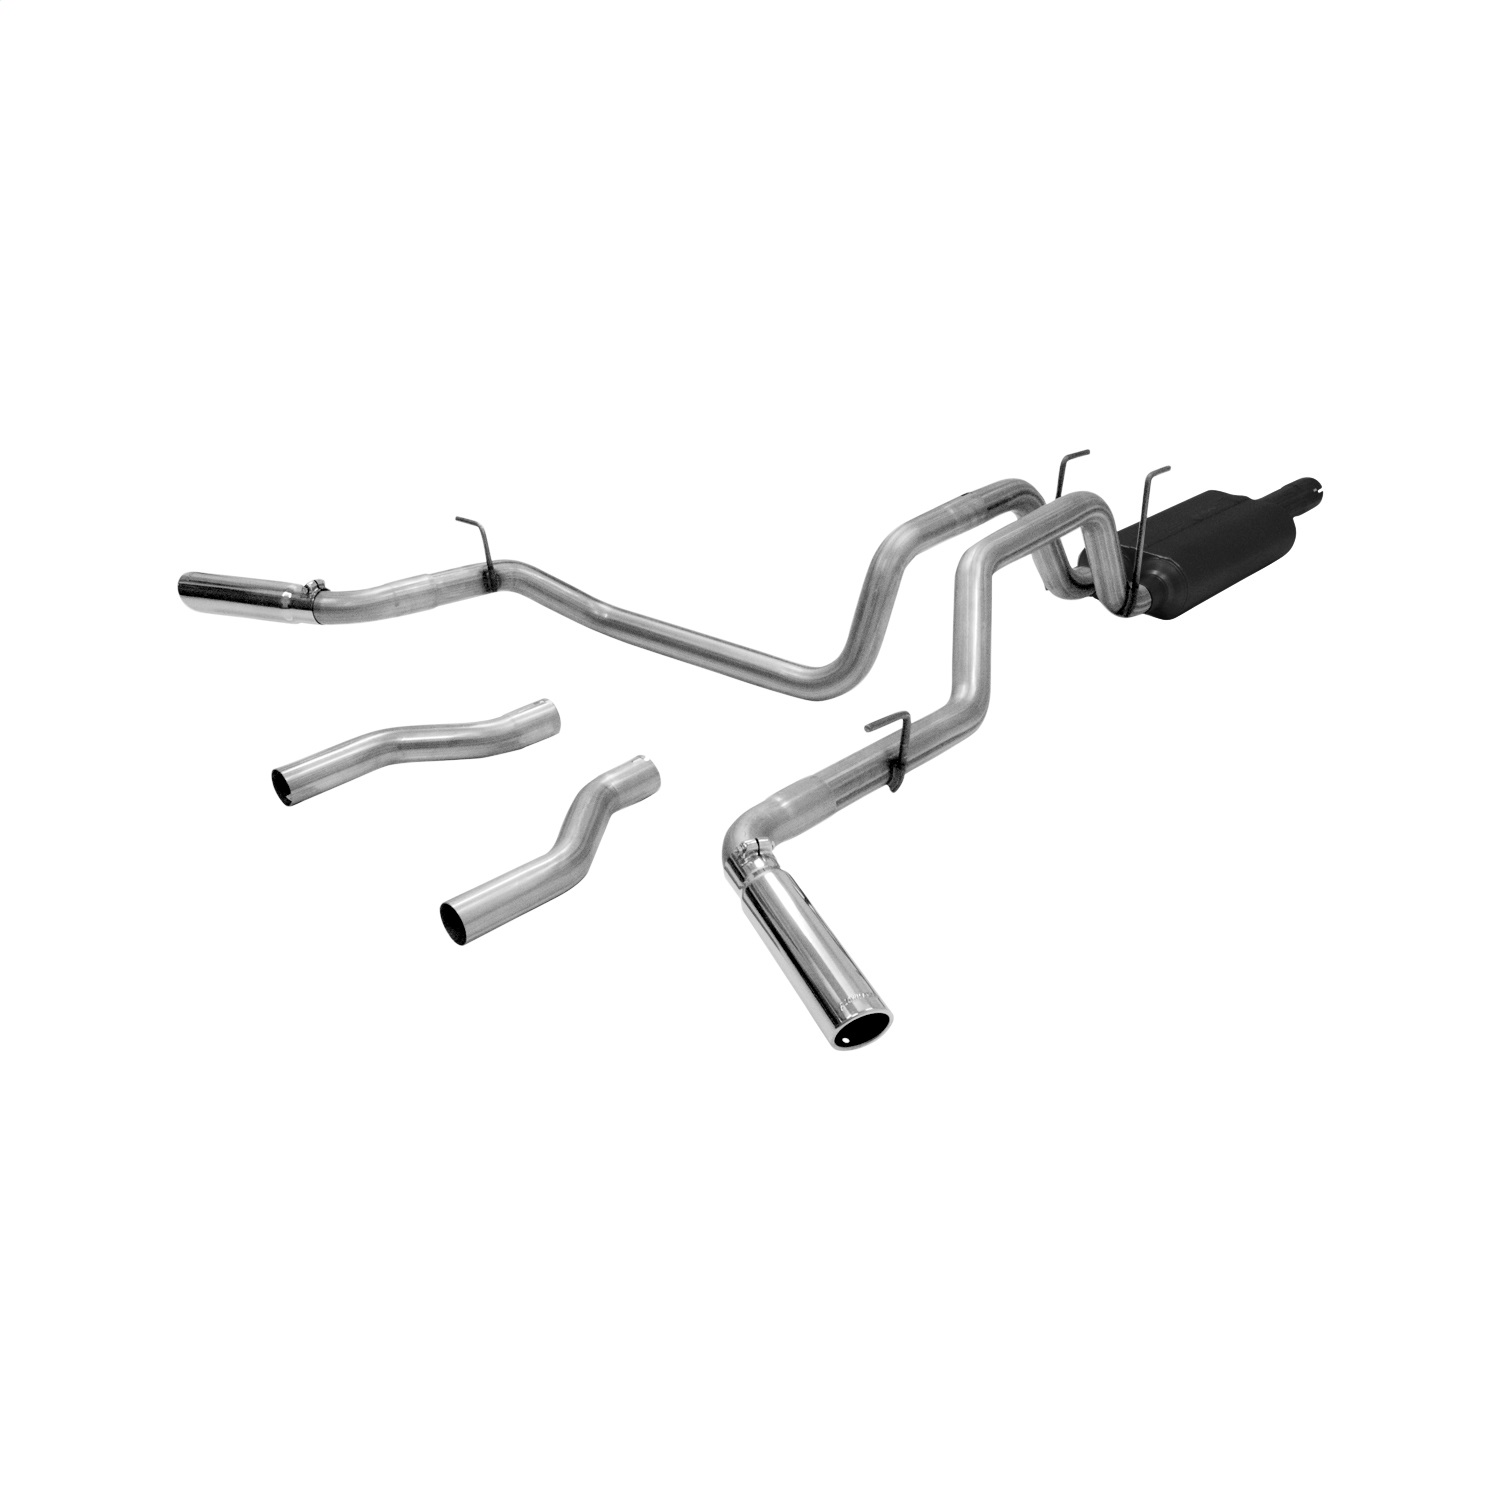 Flowmaster Flowmaster 817423 American Thunder Cat Back Exhaust System Fits 06-08 Ram 1500